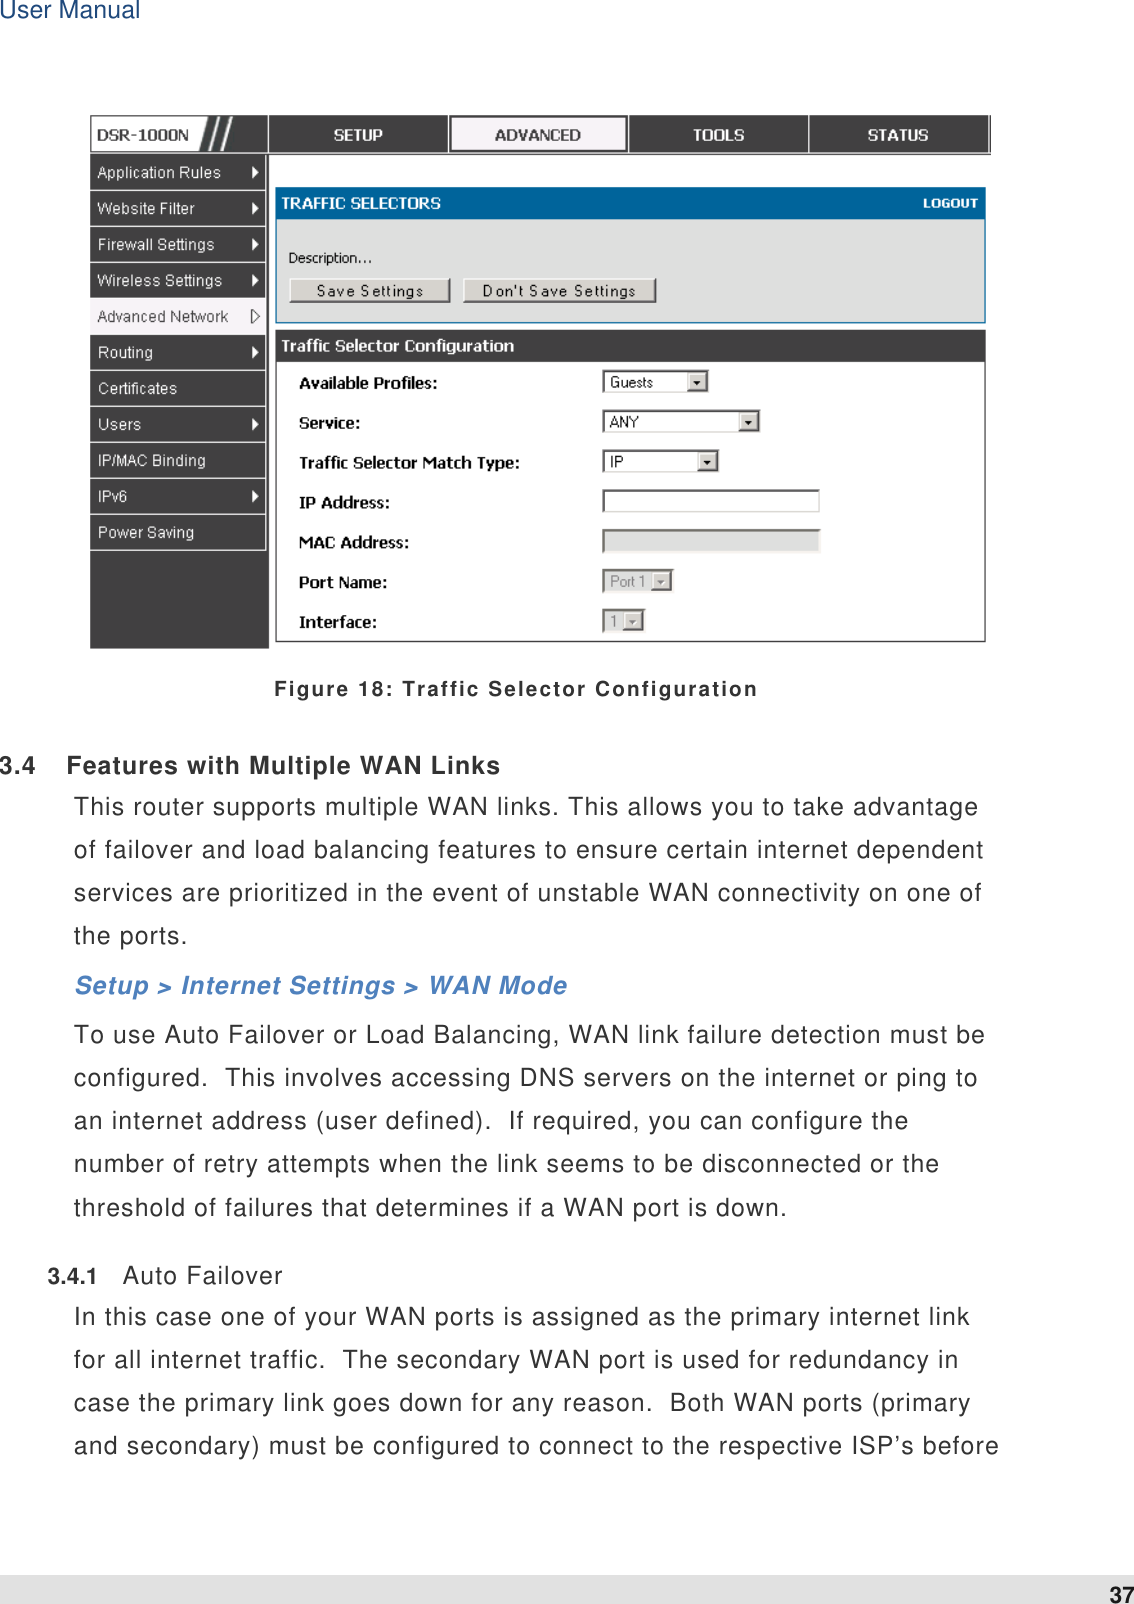 User Manual 37    Figure 18: Traffic Selector Configuration 3.4  Features with Multiple WAN Links This router supports multiple WAN links. This allows you to take advantage of failover and load balancing features to ensure certain internet dependent services are prioritized in the event of unstable WAN connectivity on one of the ports.  Setup &gt; Internet Settings &gt; WAN Mode To use Auto Failover or Load Balancing, WAN link failure detection must be configured.  This involves accessing DNS servers on the internet or ping to an internet address (user defined).  If required, you can configure the number of retry attempts when the link seems to be disconnected or the threshold of failures that determines if a WAN port is down. 3.4.1  Auto Failover In this case one of your WAN ports is assigned as the primary internet link for all internet traffic.  The secondary WAN port is used for redundancy in case the primary link goes down for any reason.  Both WAN ports (primary and secondary) must be configured to connect to the respective ISP’s before 